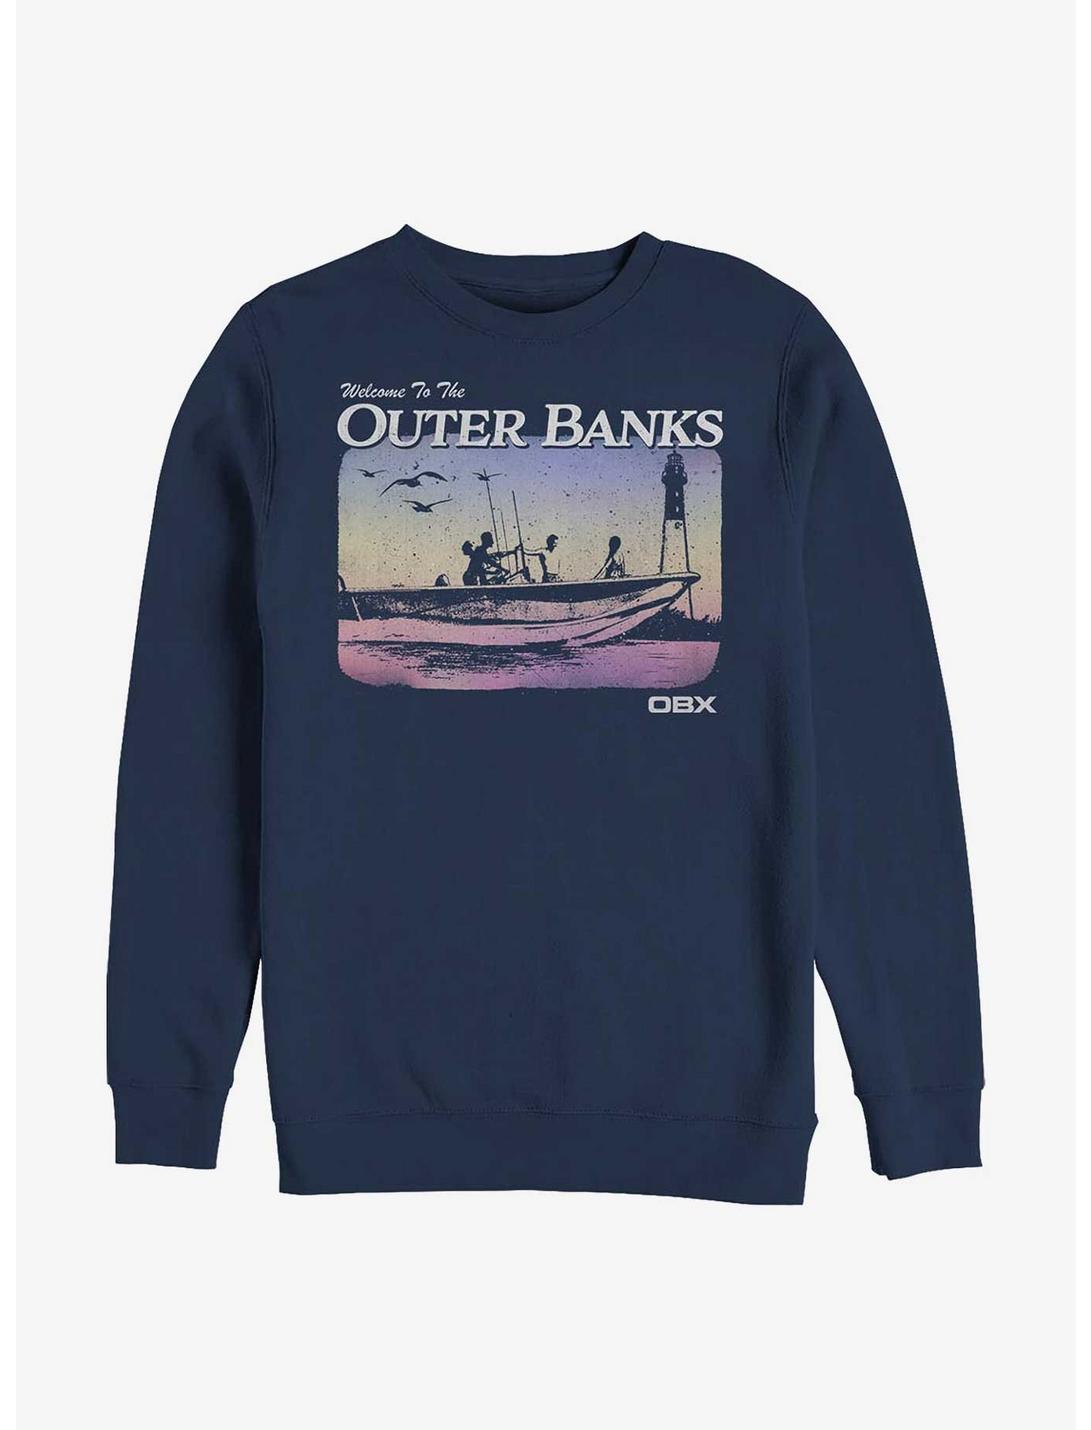 Outer Banks Welcome To Sweatshirt, NAVY, hi-res